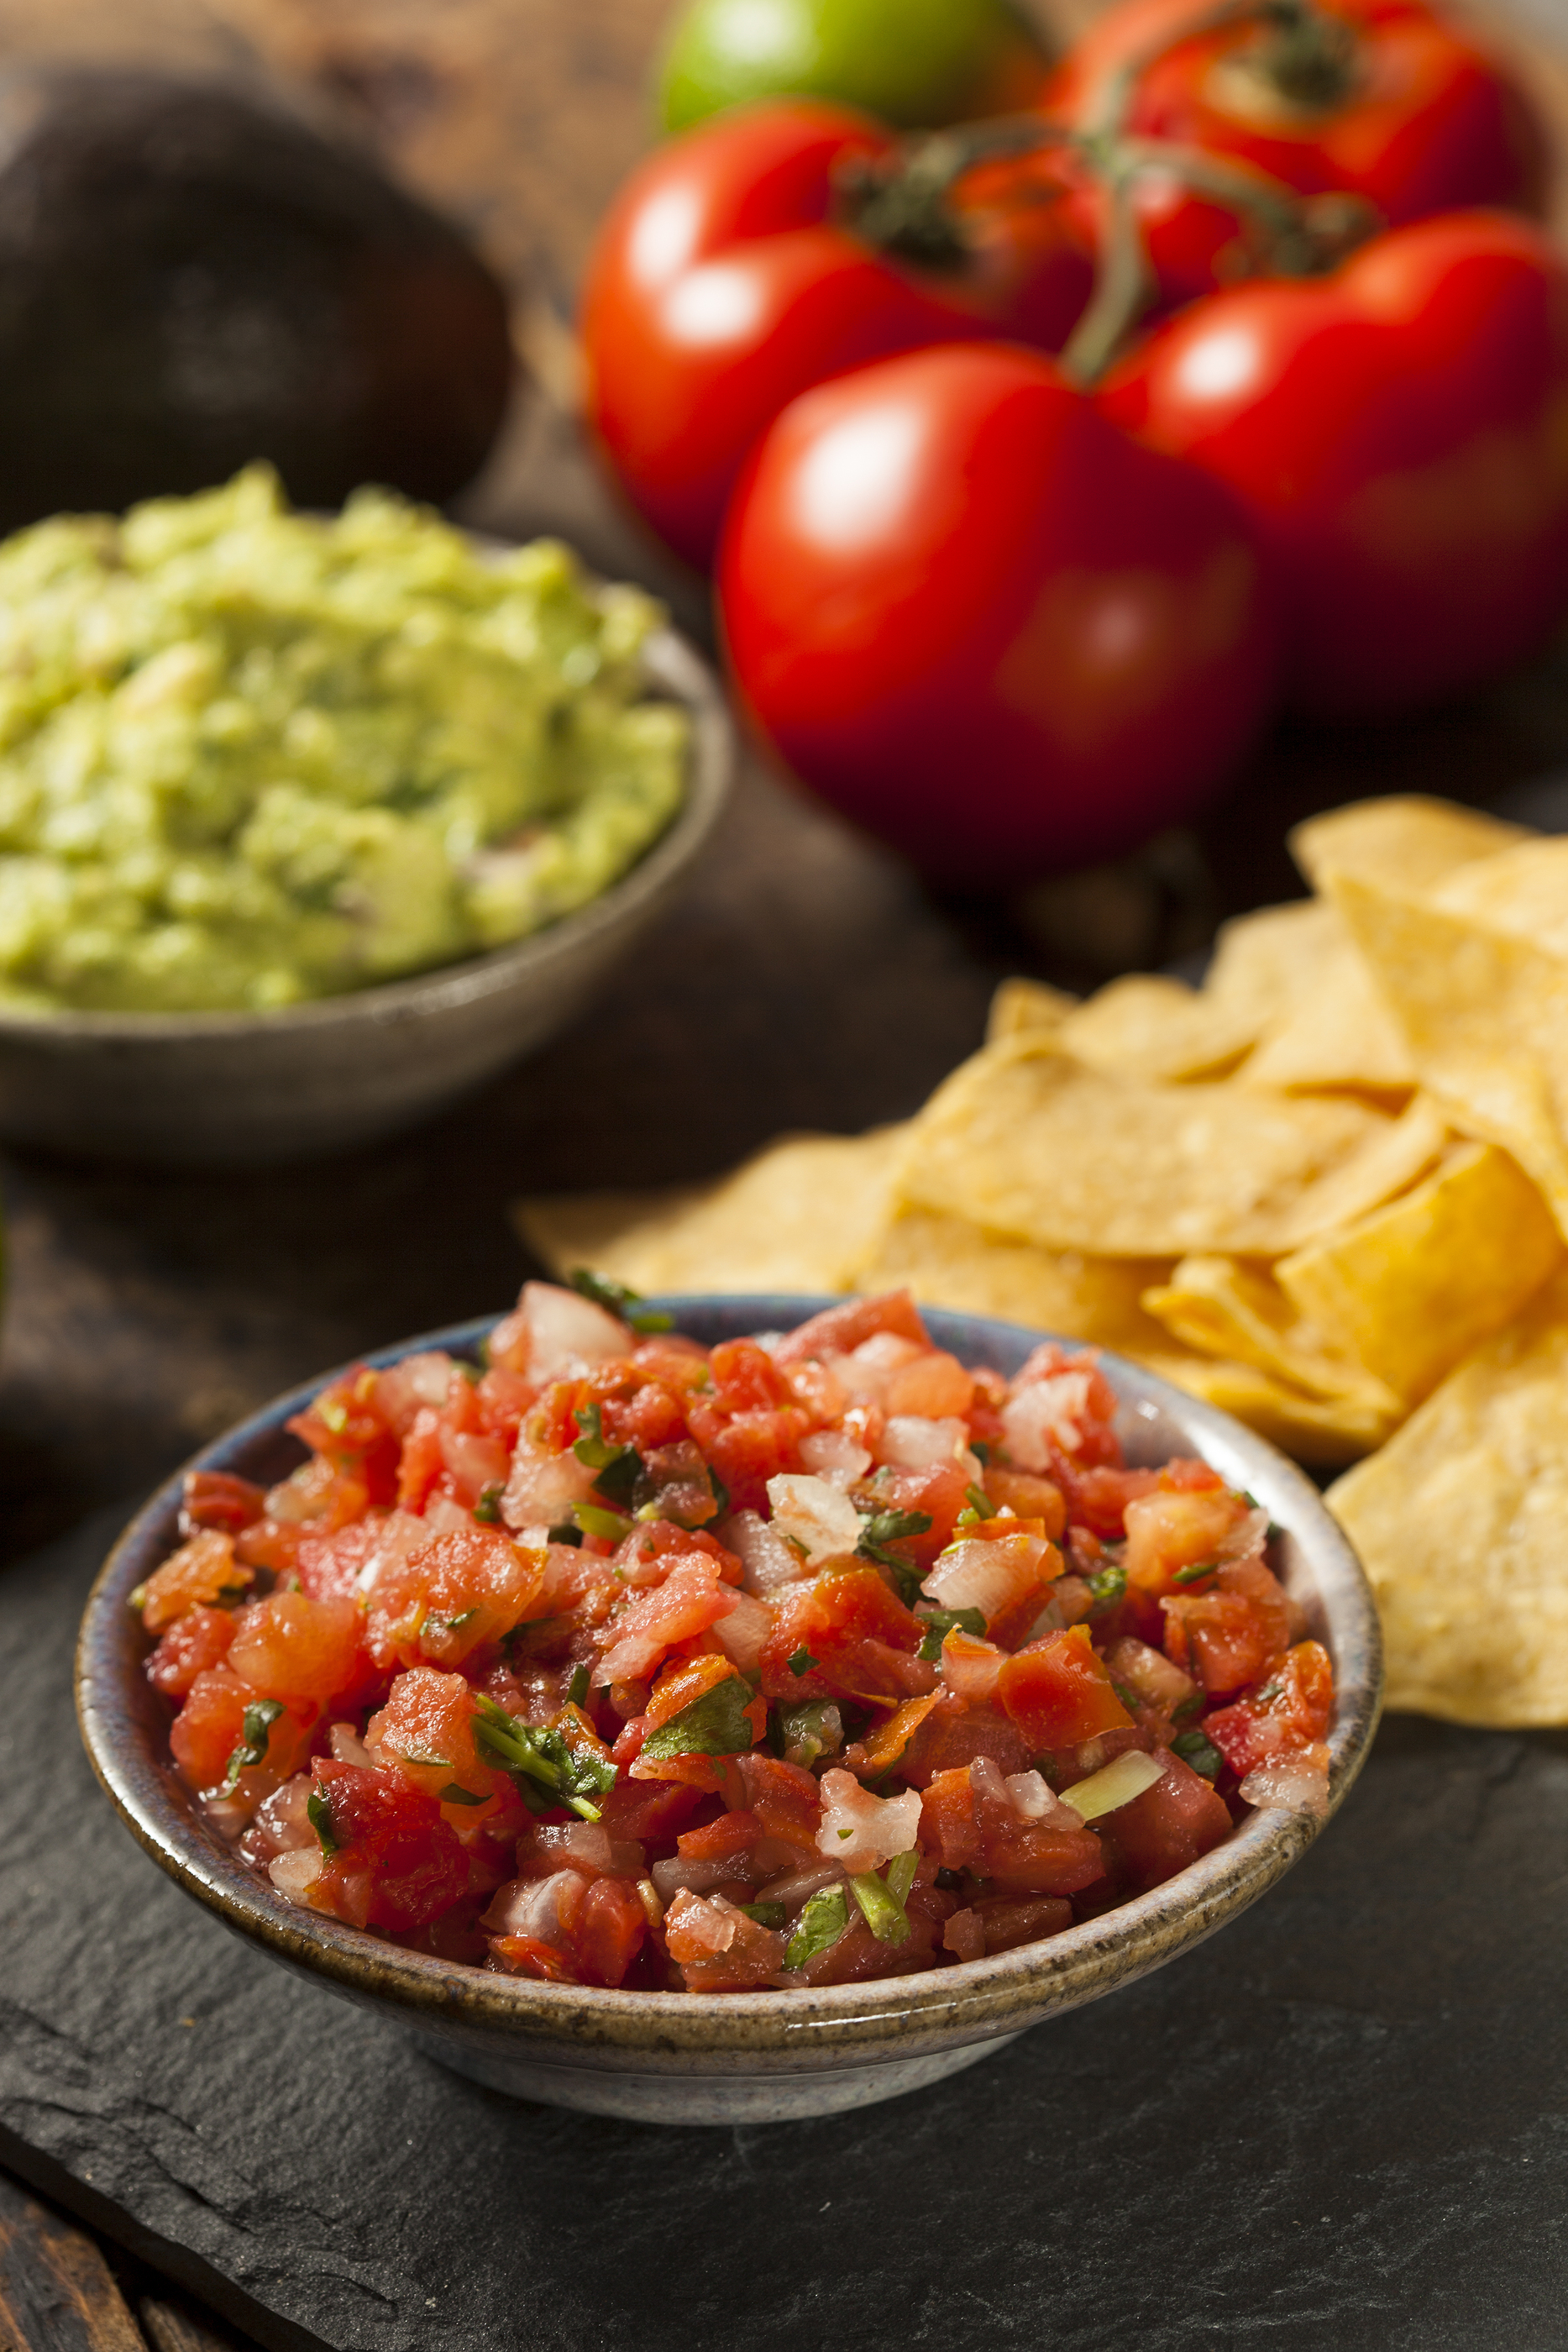 Cooking at Home - Garden Salsa | Susquehanna Life Can Salsa Be Left Out Overnight